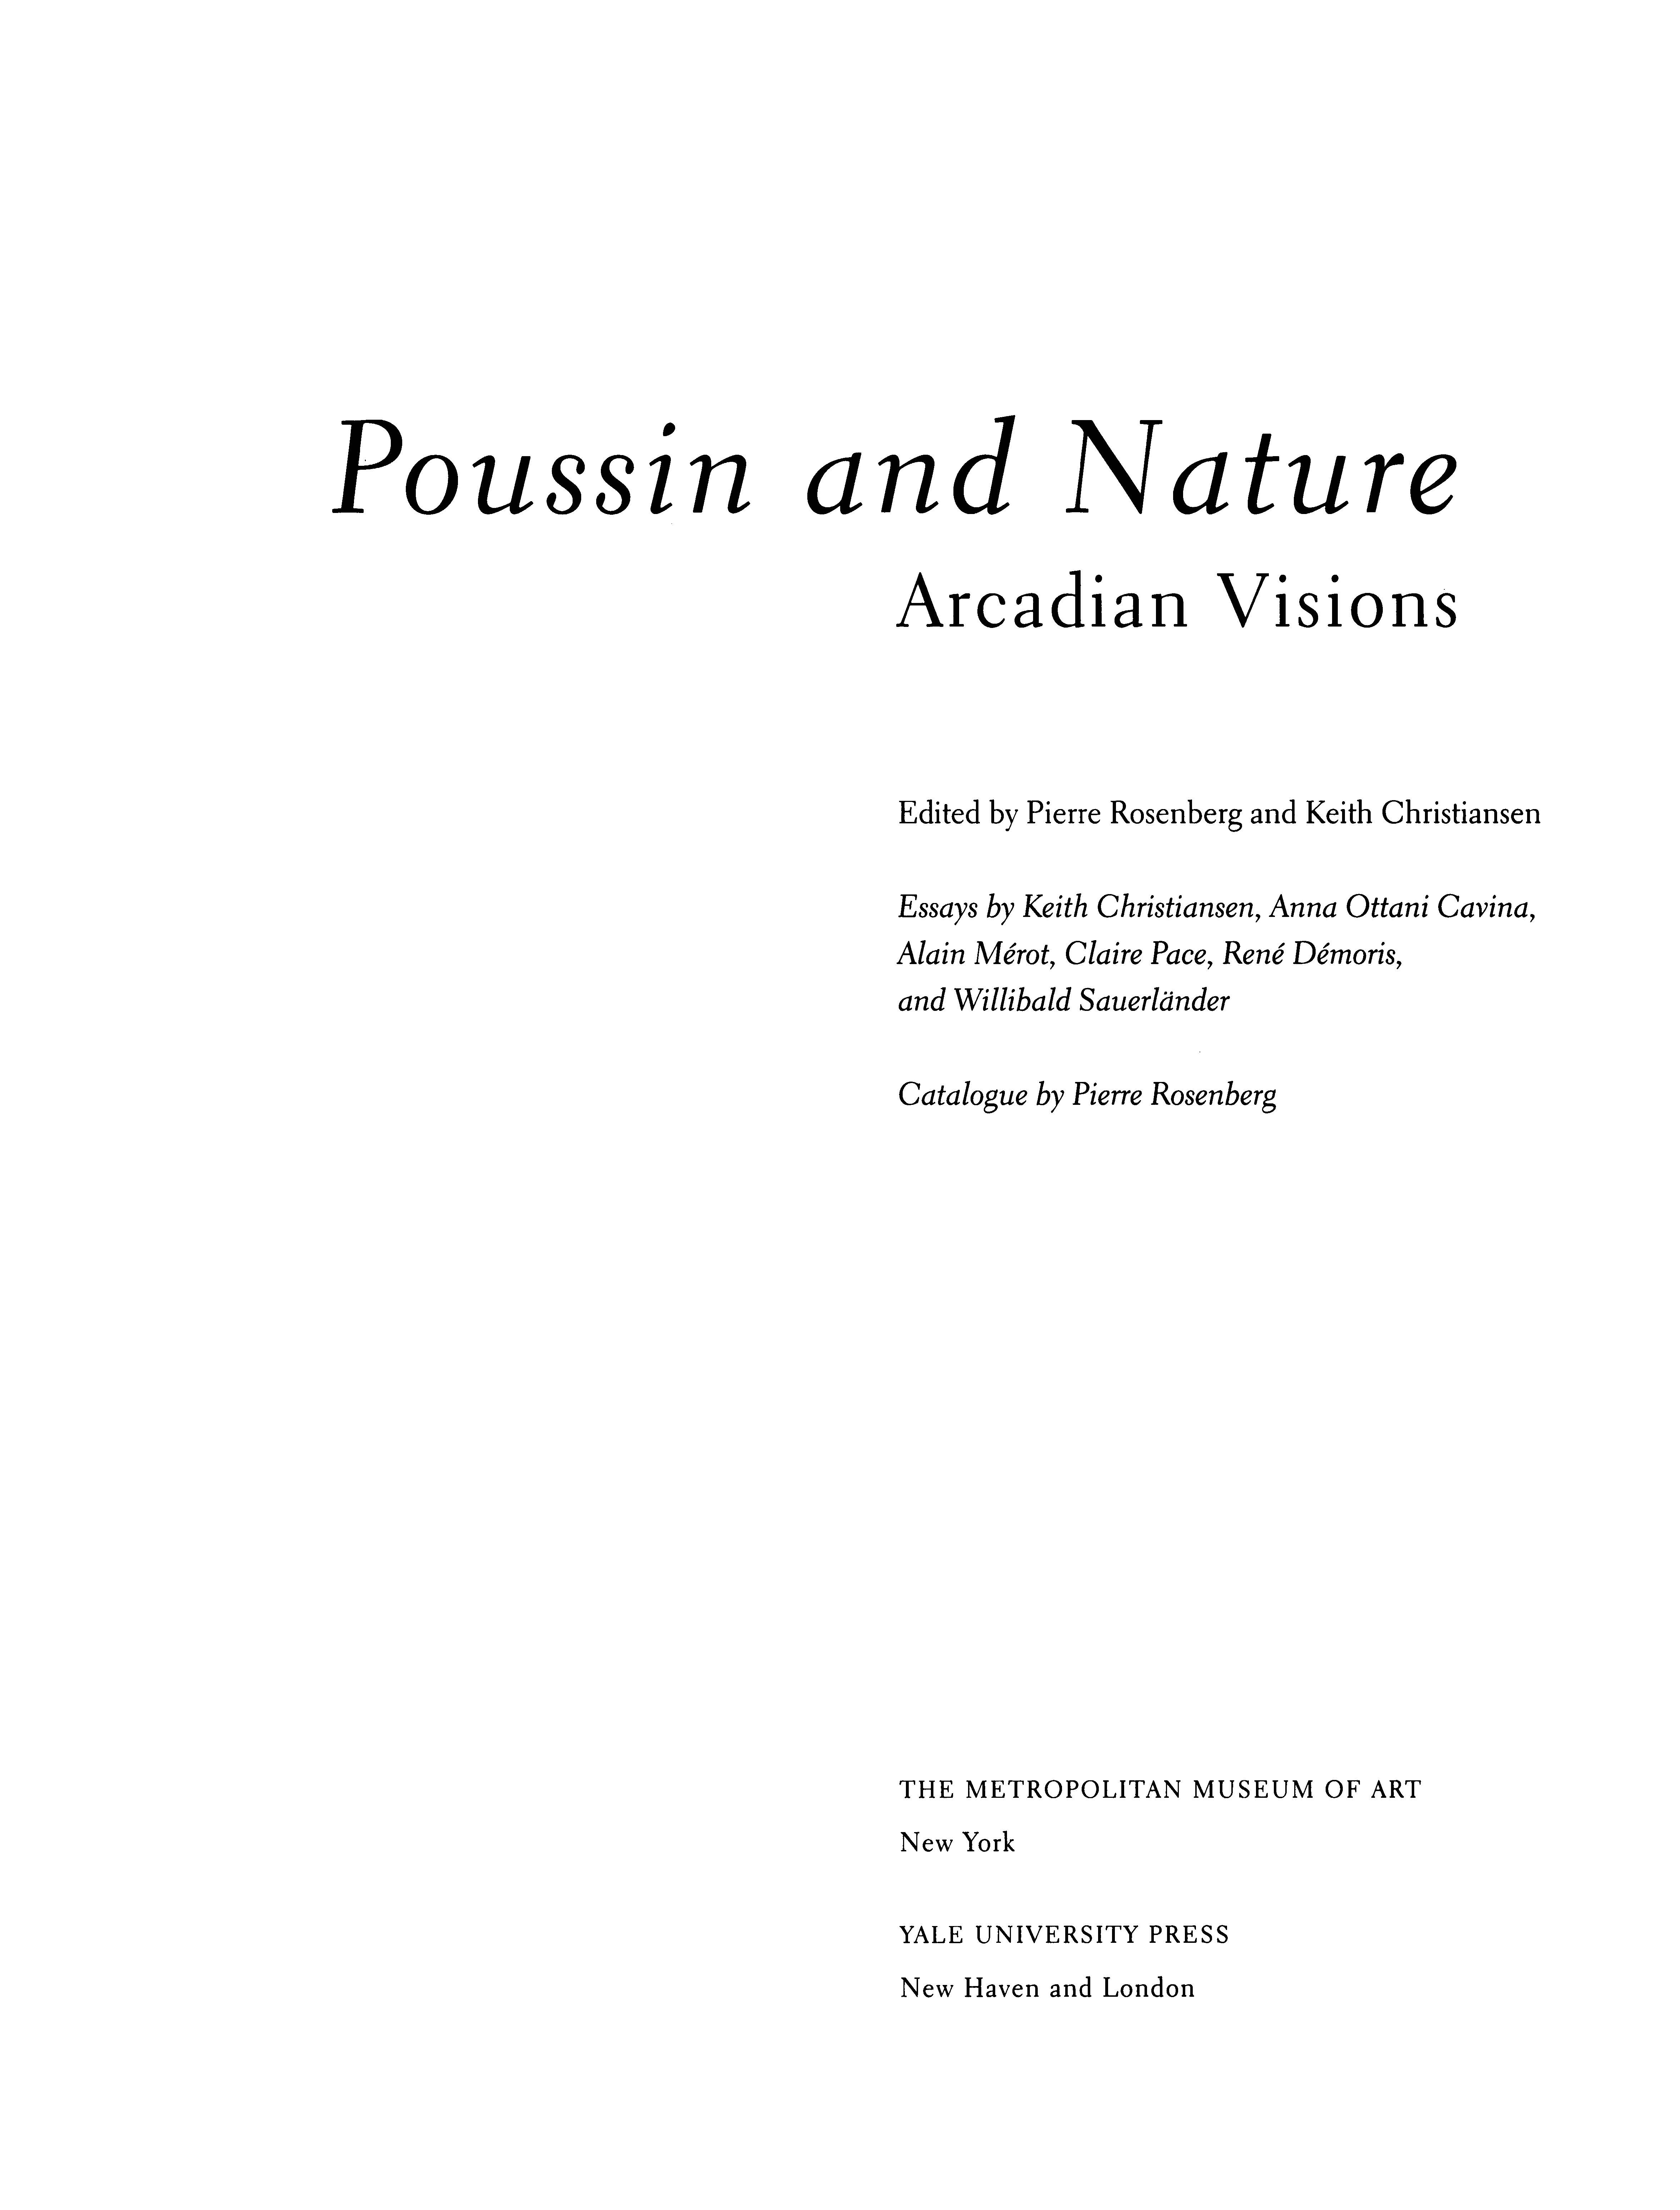 Poussin and Nature: Arcadian Visions